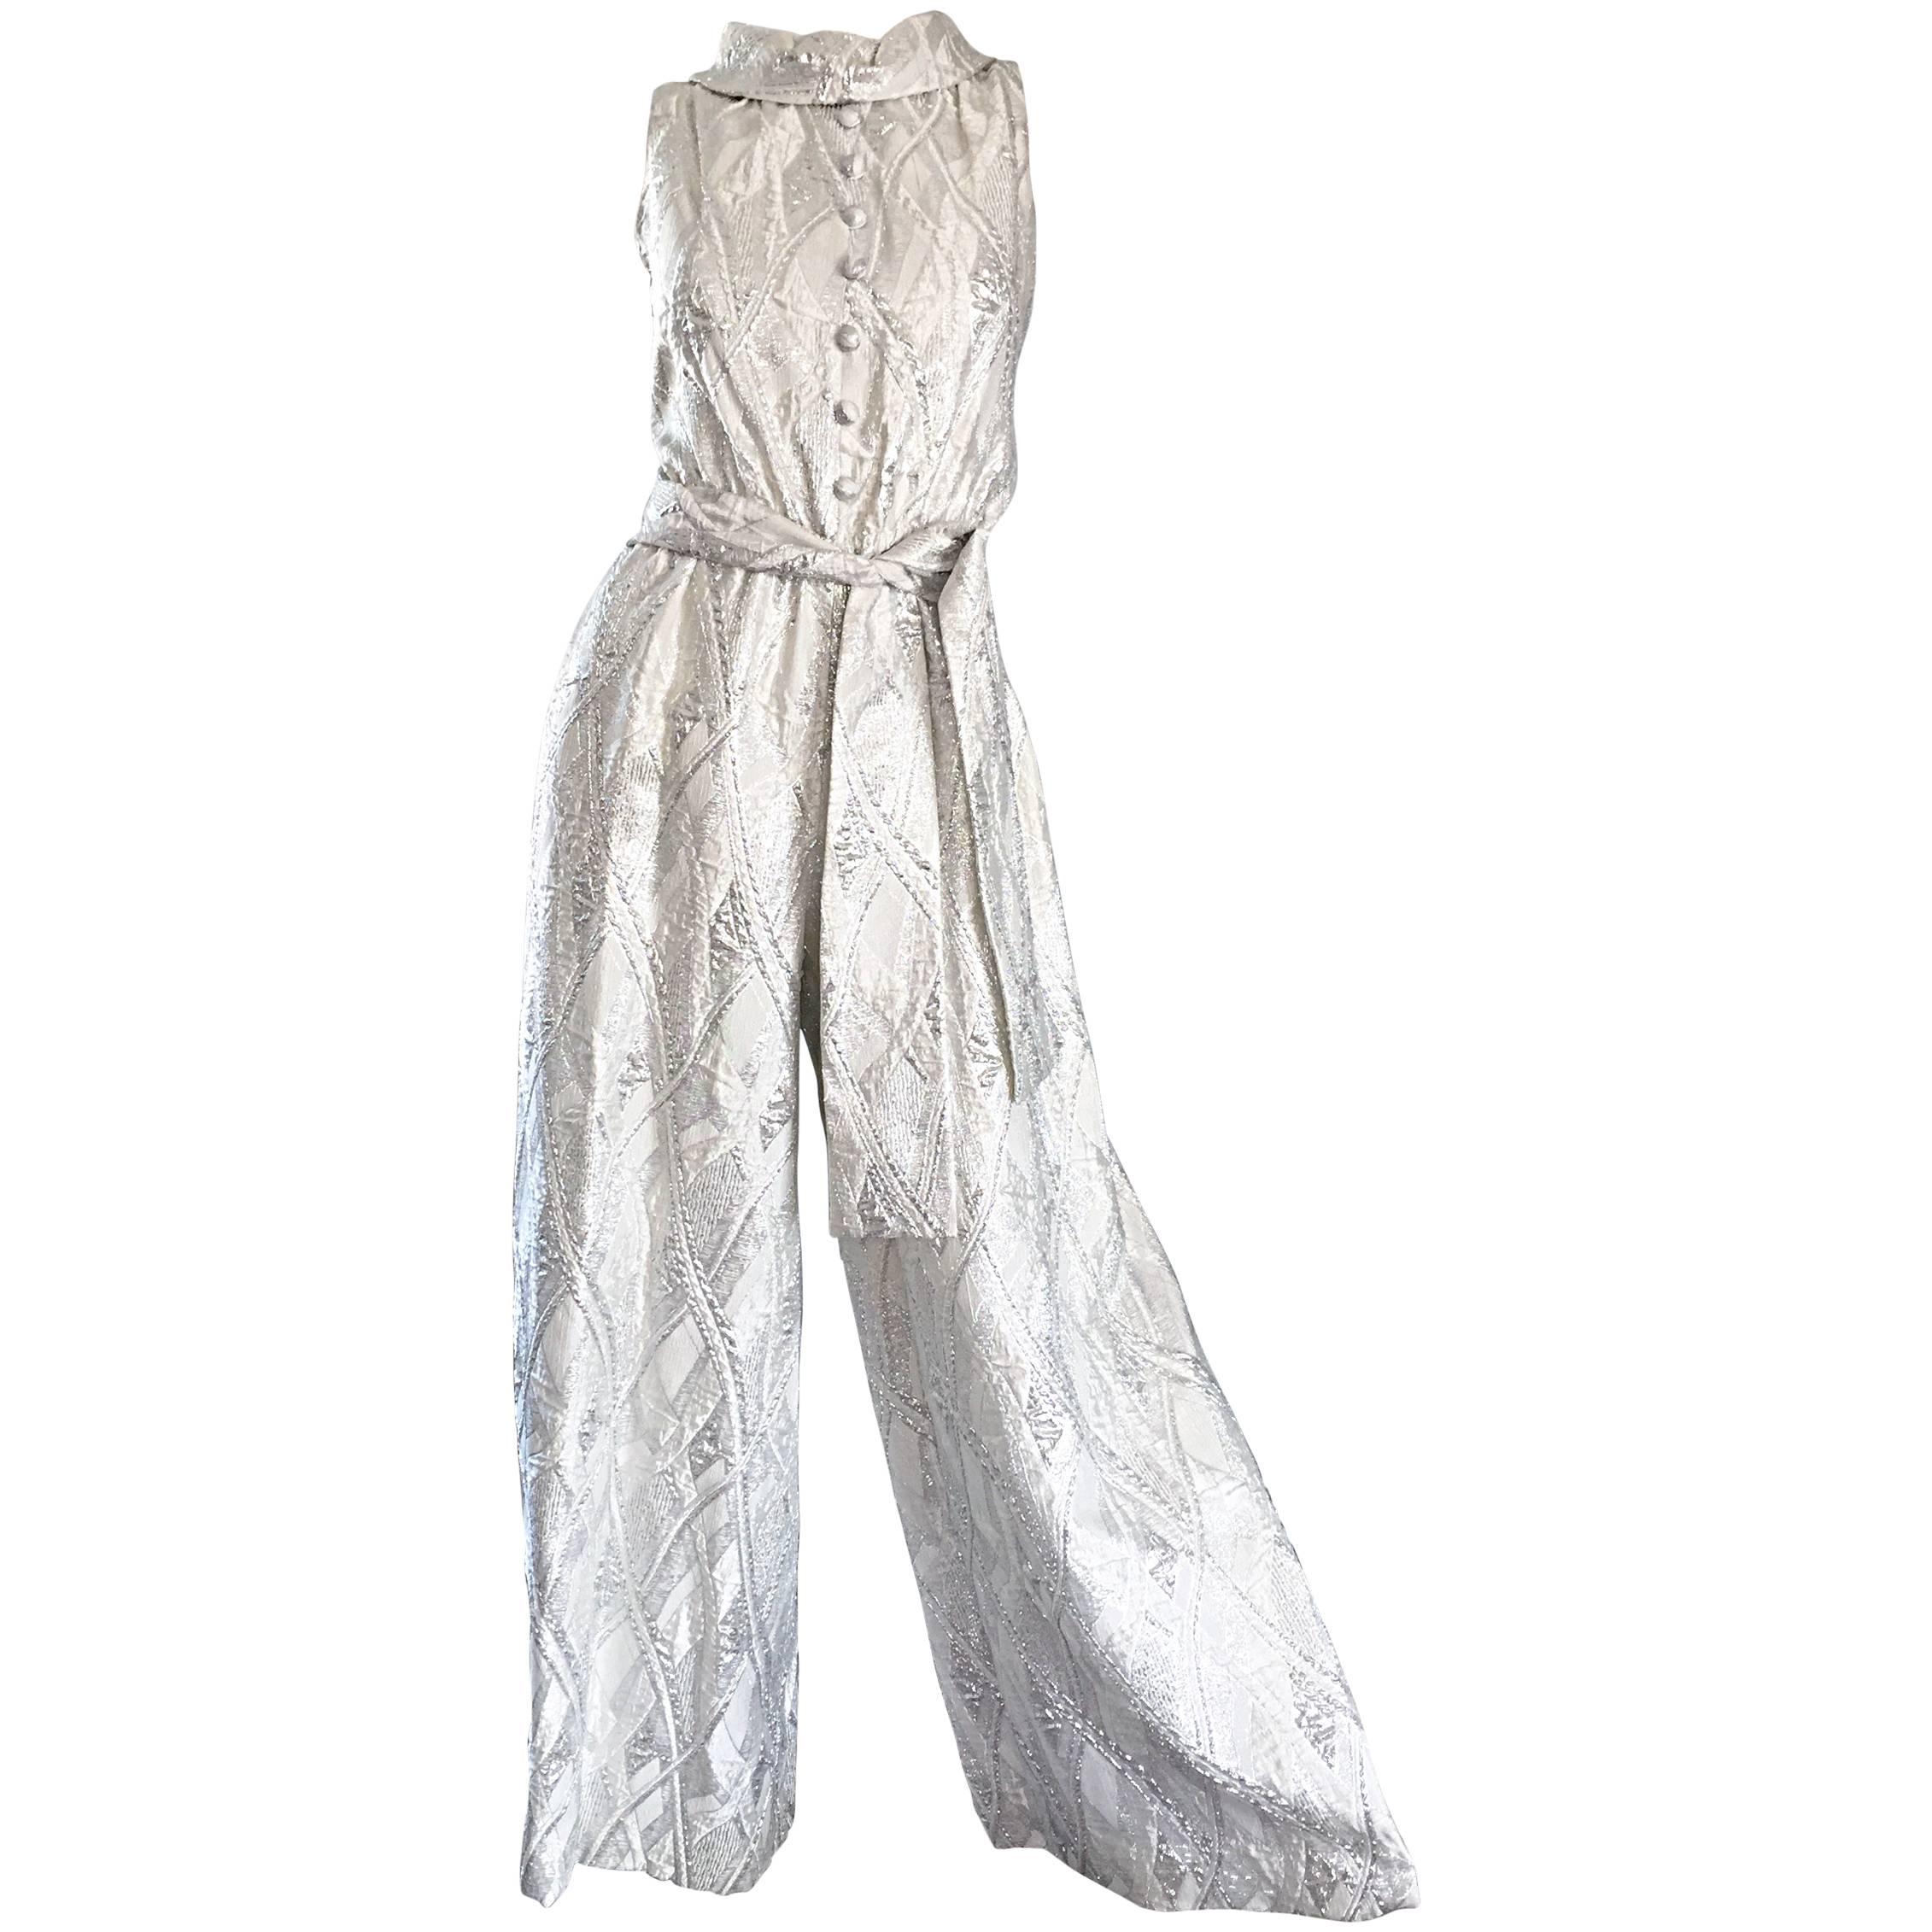 Leslie Fay 1960s Deadstock Silver & White Brocade Wide Palazzo Leg Jumpsuit NEW